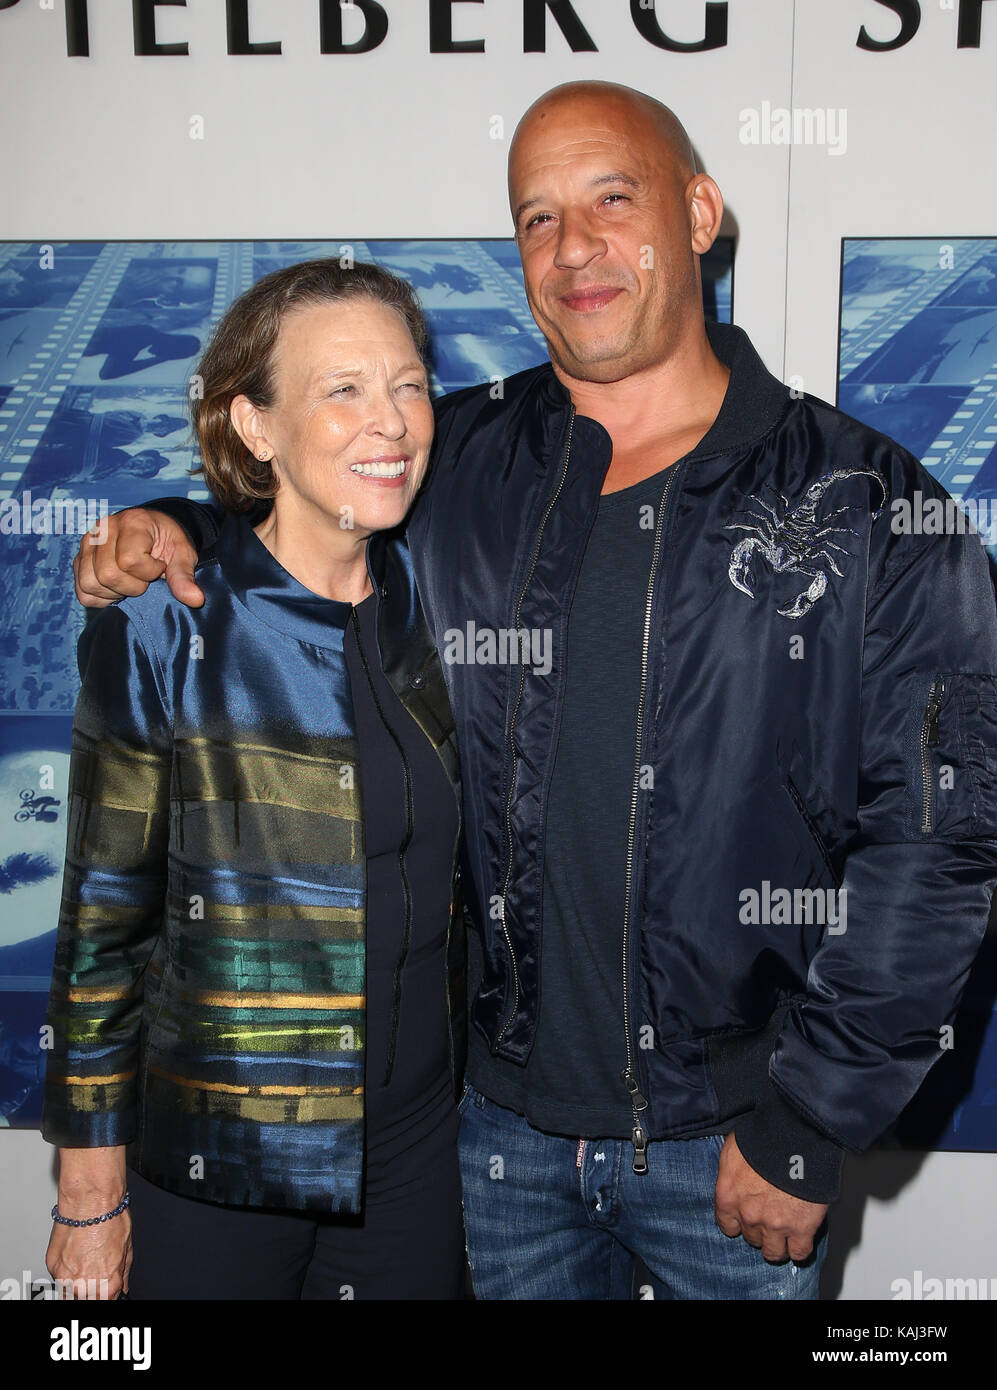 Hollywood, California, USA. 26th Sep, 2017. Delora Vincent, Vin Diesel, at HBO'S DOCUMNETARY FILMS SPIELBERG LA PREMIERE at Paramount Studios on September 26, 2017 in Los Angeles, California. Credit: Faye Sadou/Media Punch/Alamy Live News Stock Photo